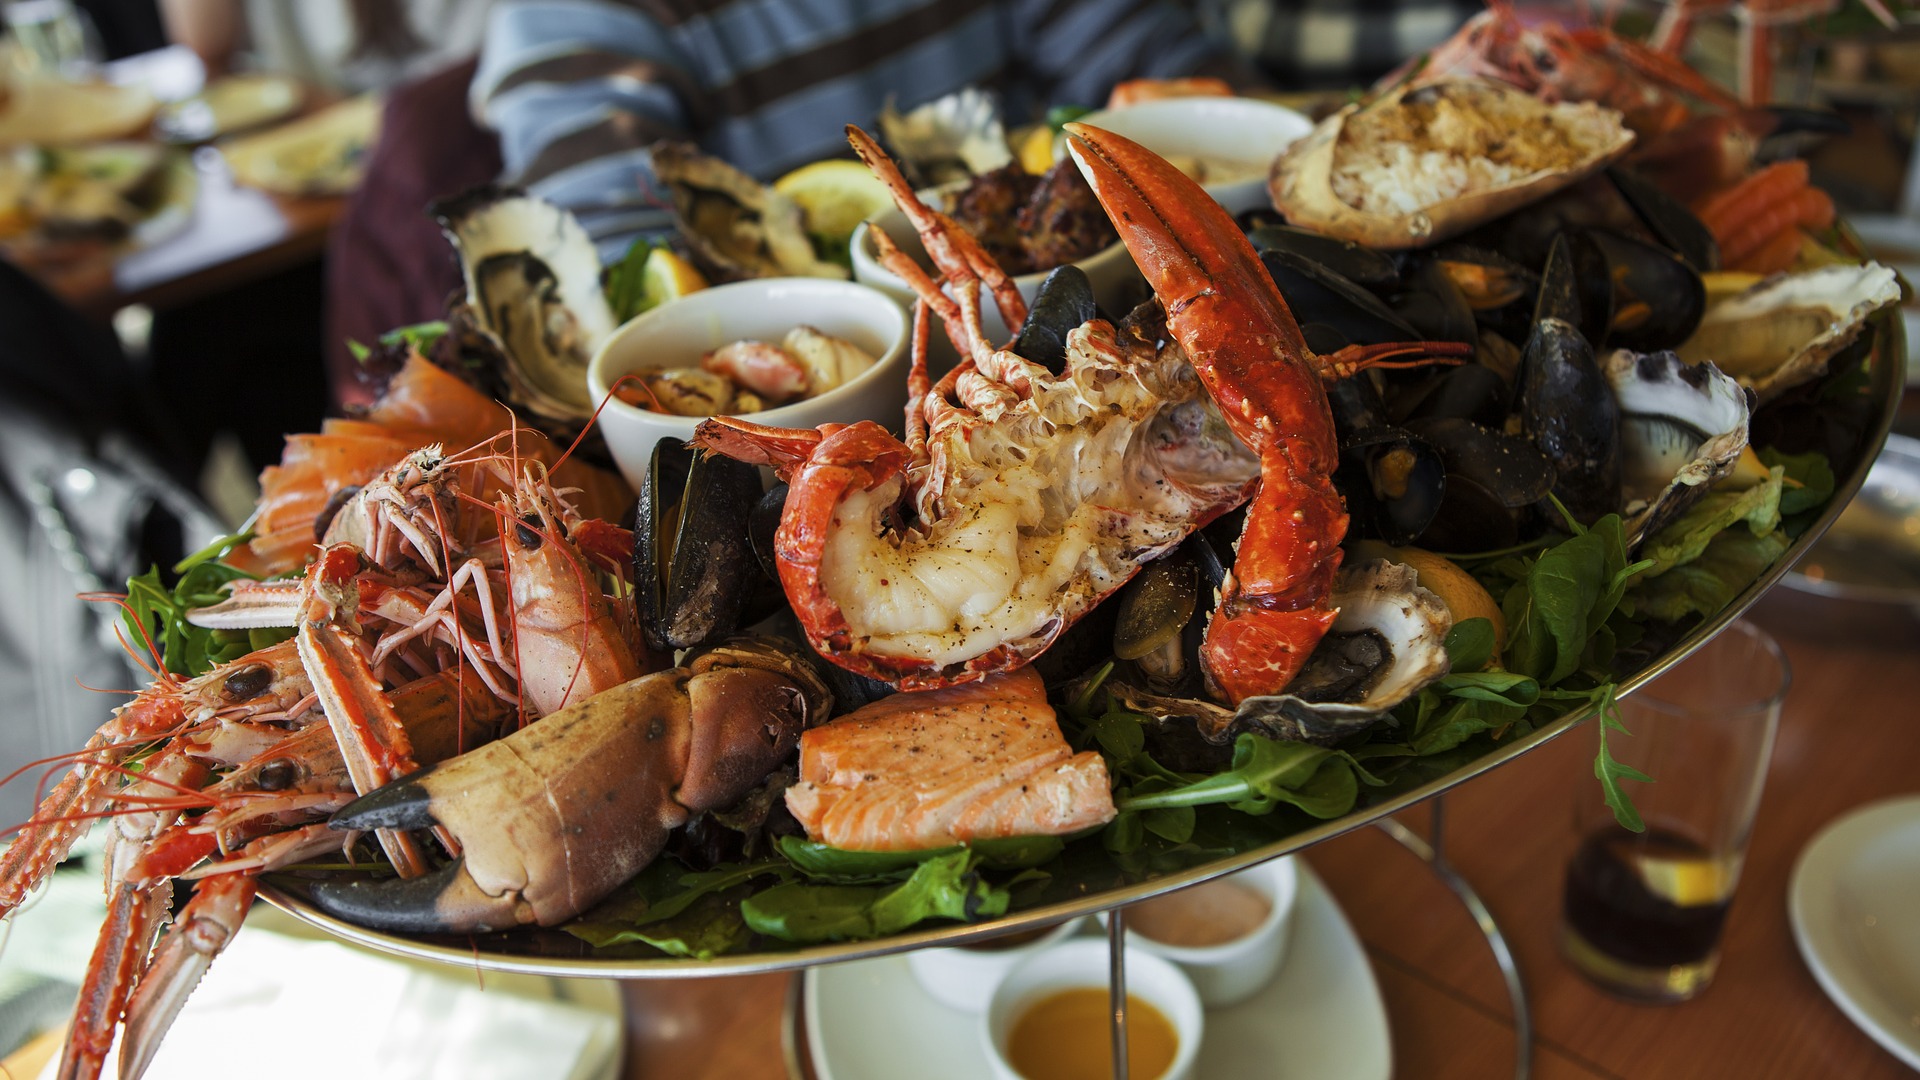 A plate of seafood